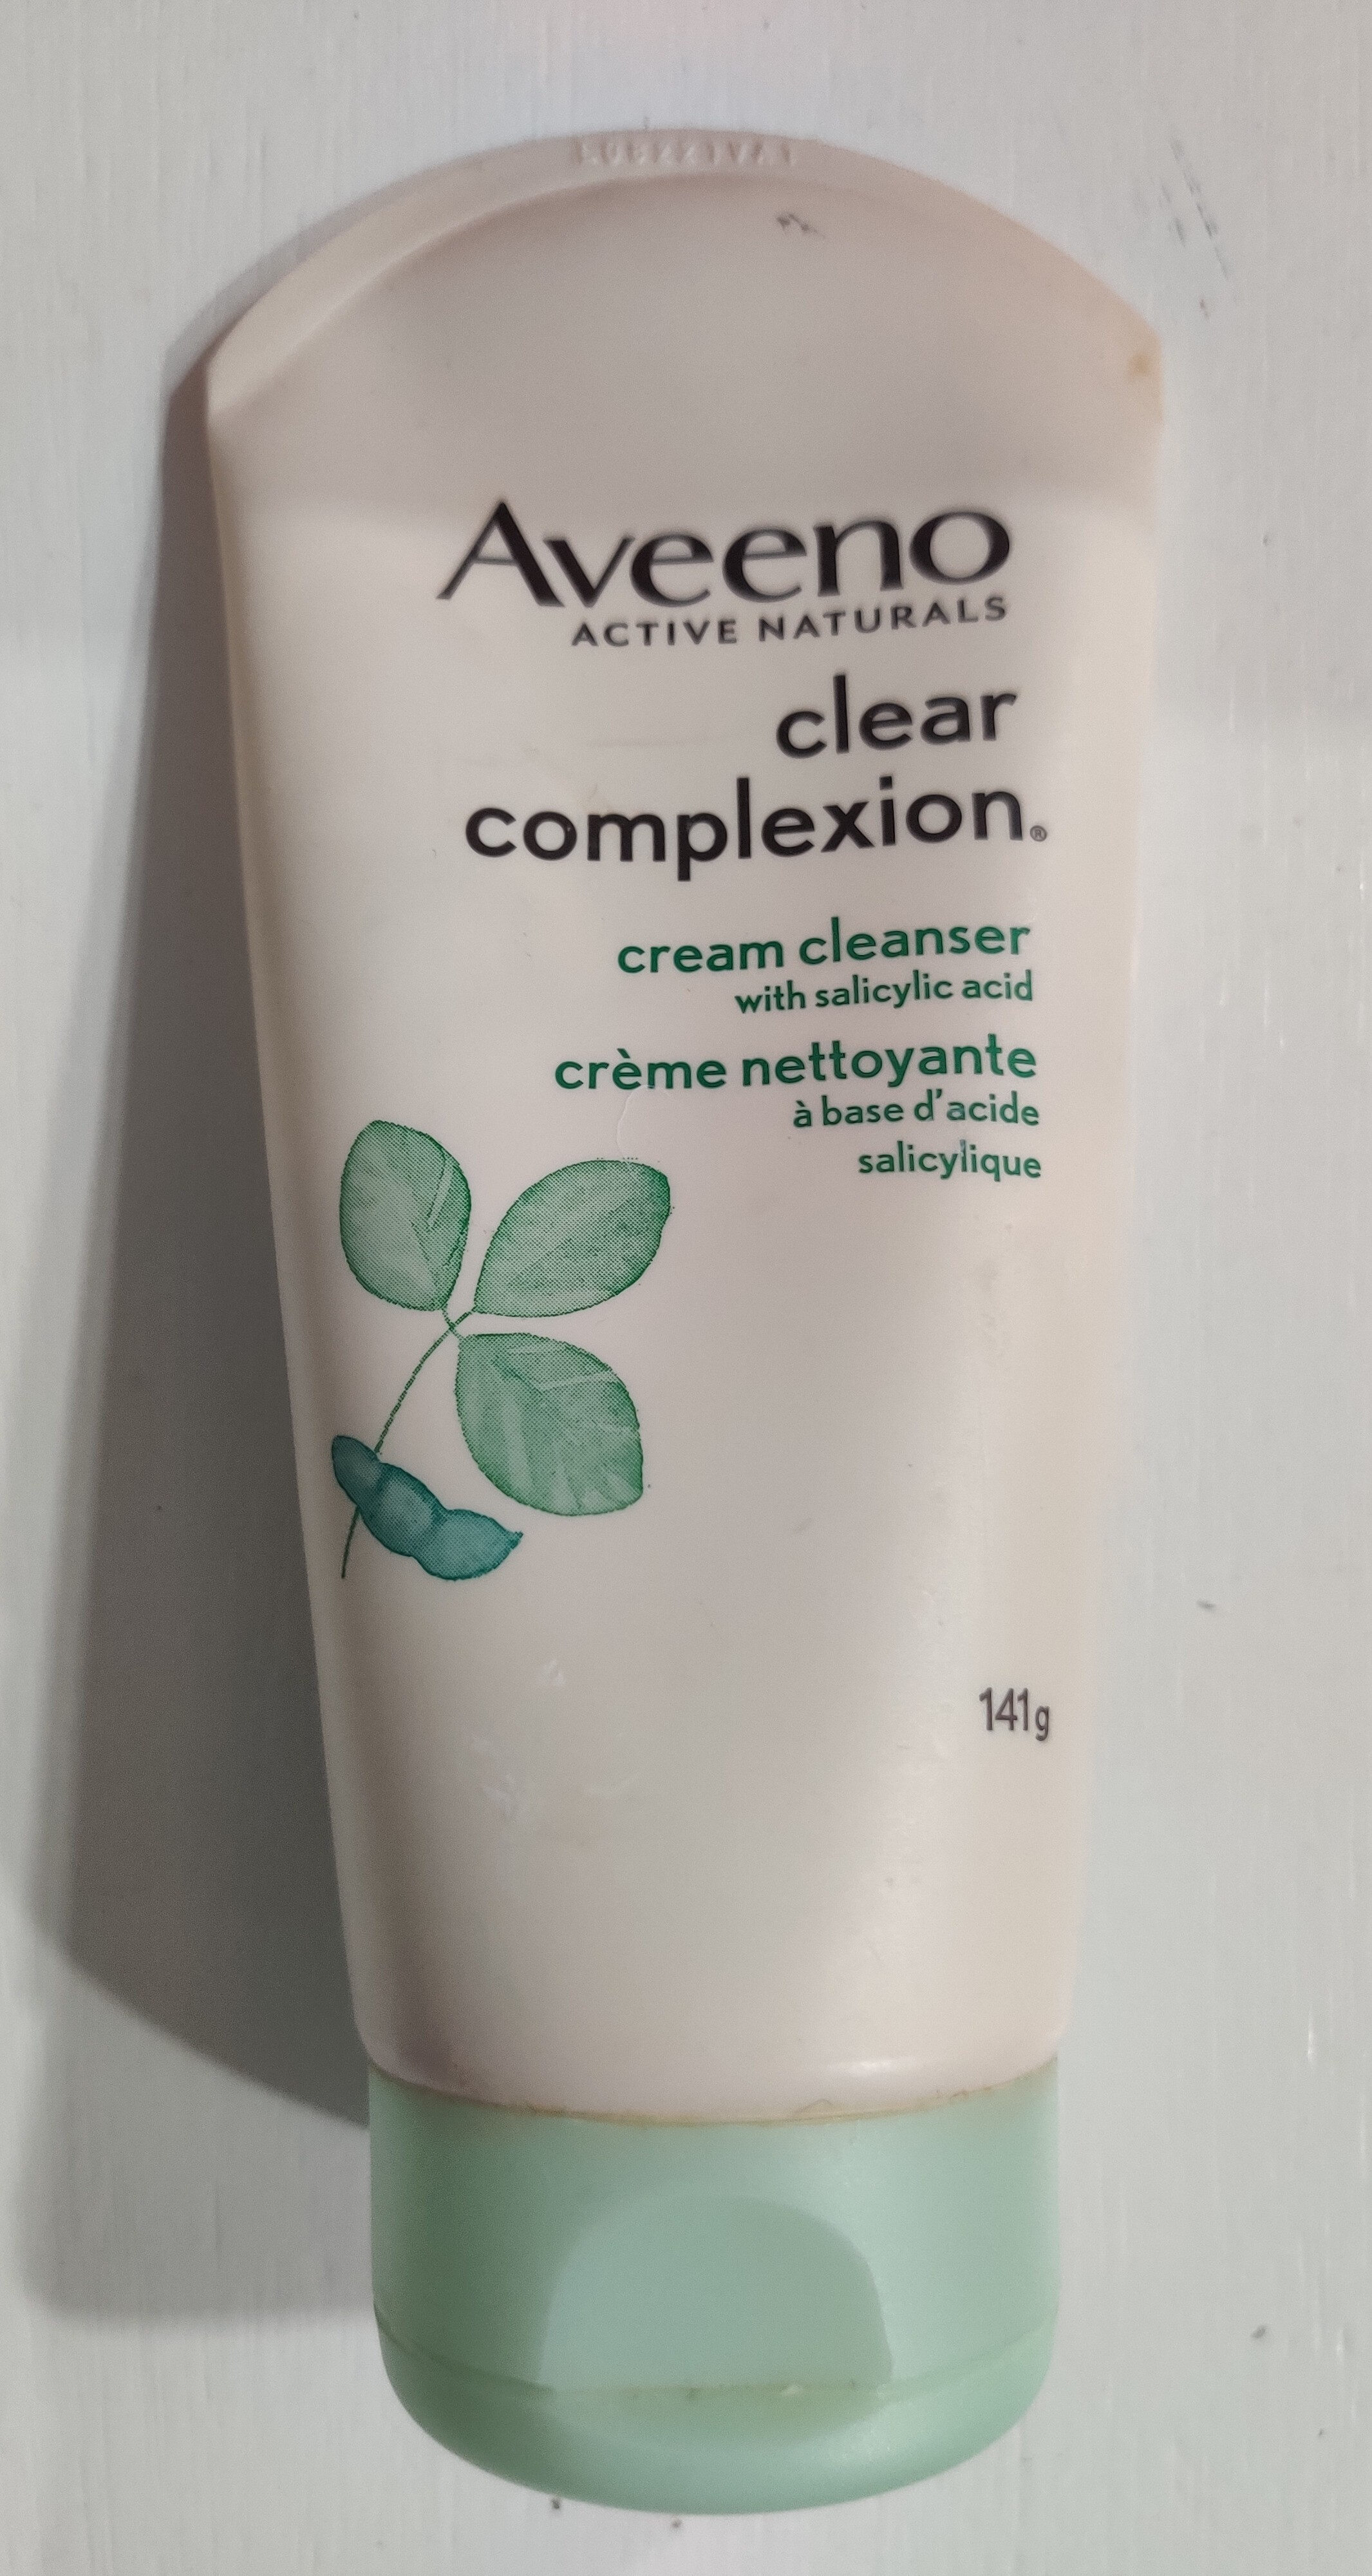 Aveeno clear completion cream cleanser - Tuote - en